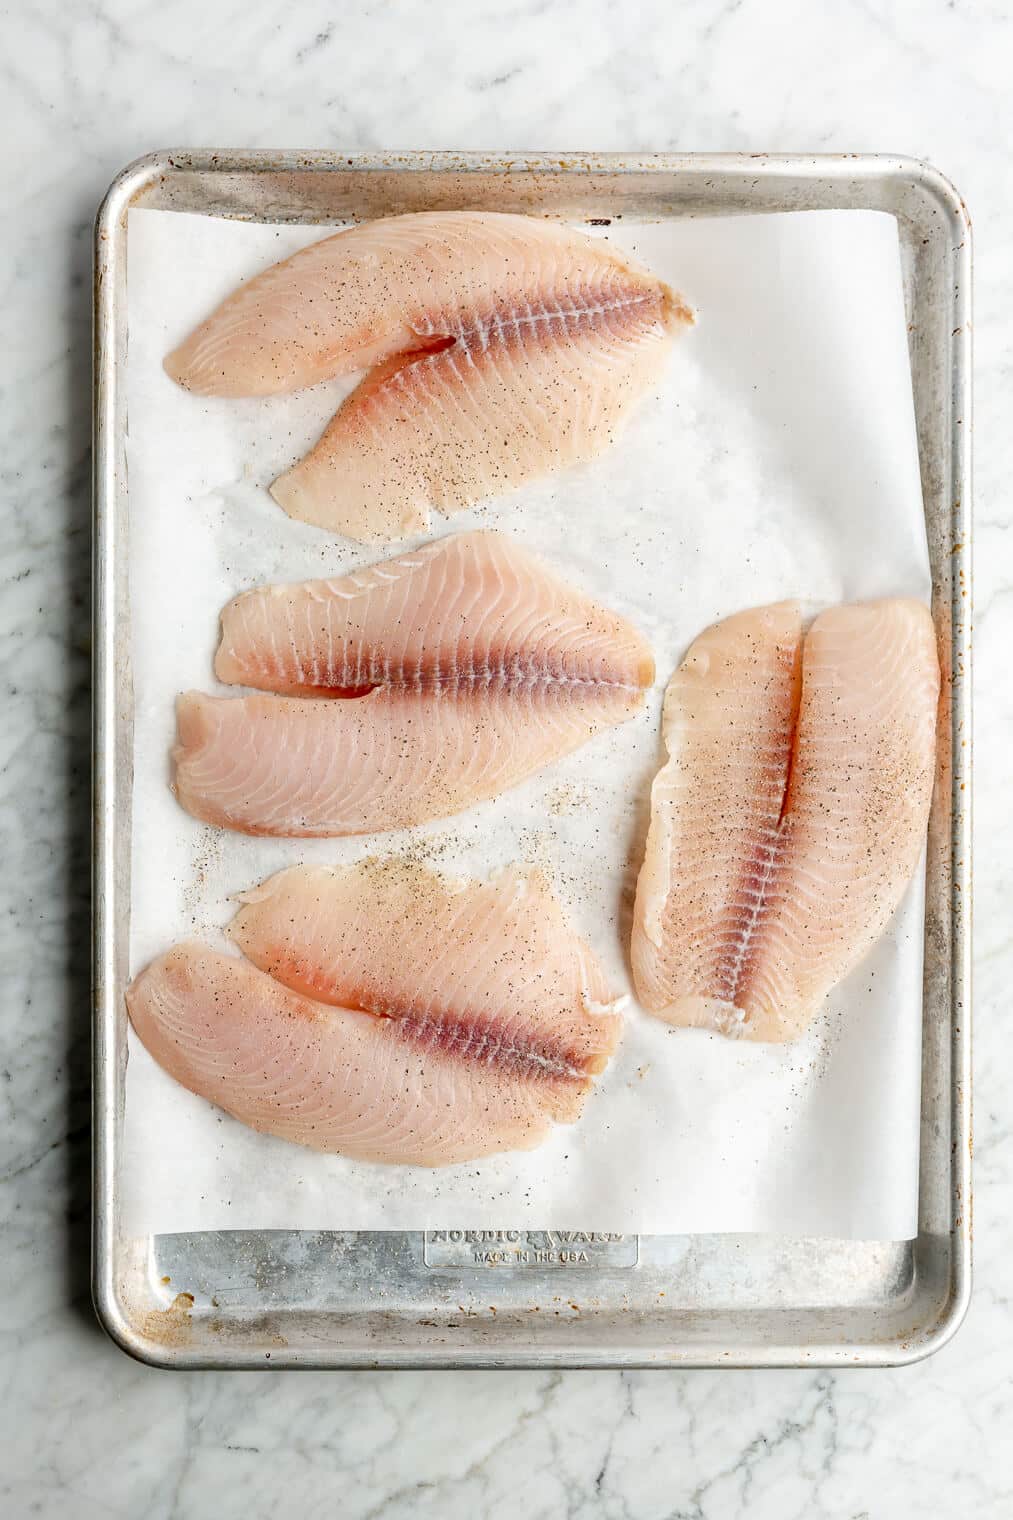 Top view of 4 raw tilapia filets on a parchment paper lined sheet pan.